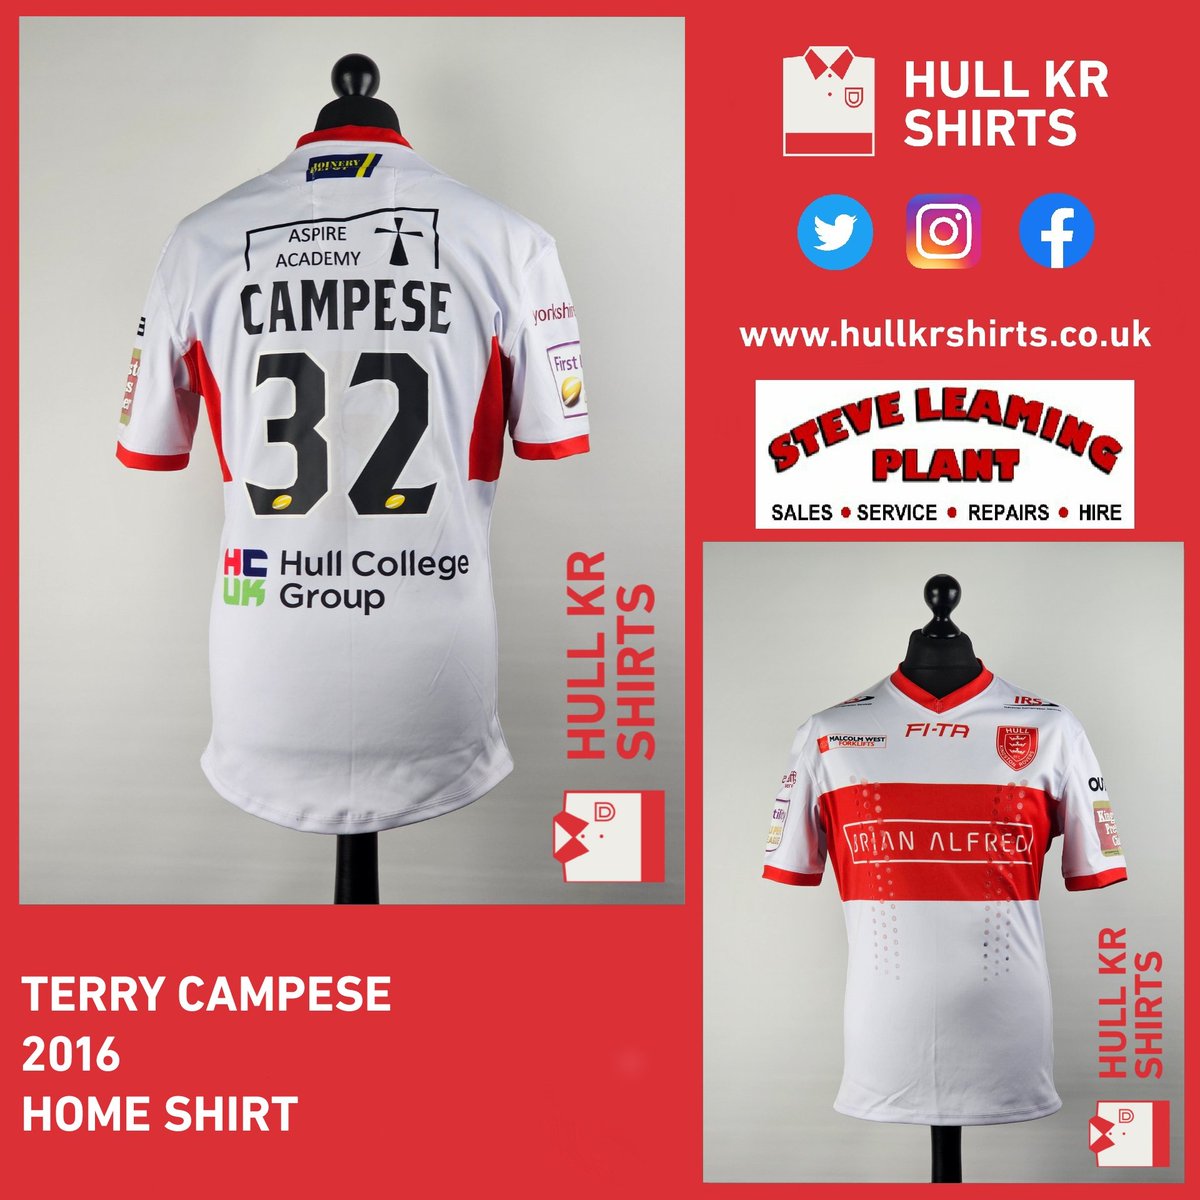 𝗧𝗲𝗿𝗿𝘆 𝗖𝗮𝗺𝗽𝗲𝘀𝗲 𝟮𝟬𝟭𝟲 𝗛𝗼𝗺𝗲 𝗦𝗵𝗶𝗿𝘁 Campese played 26 times across 2 seasons at Hull KR. We never saw enough of Campo in his time in England, but when he was on the field, he played in a dinner suit. 🎦 youtu.be/yoT_SUxno-k #HullKR | #HullKRShirts | 🔴⚪️